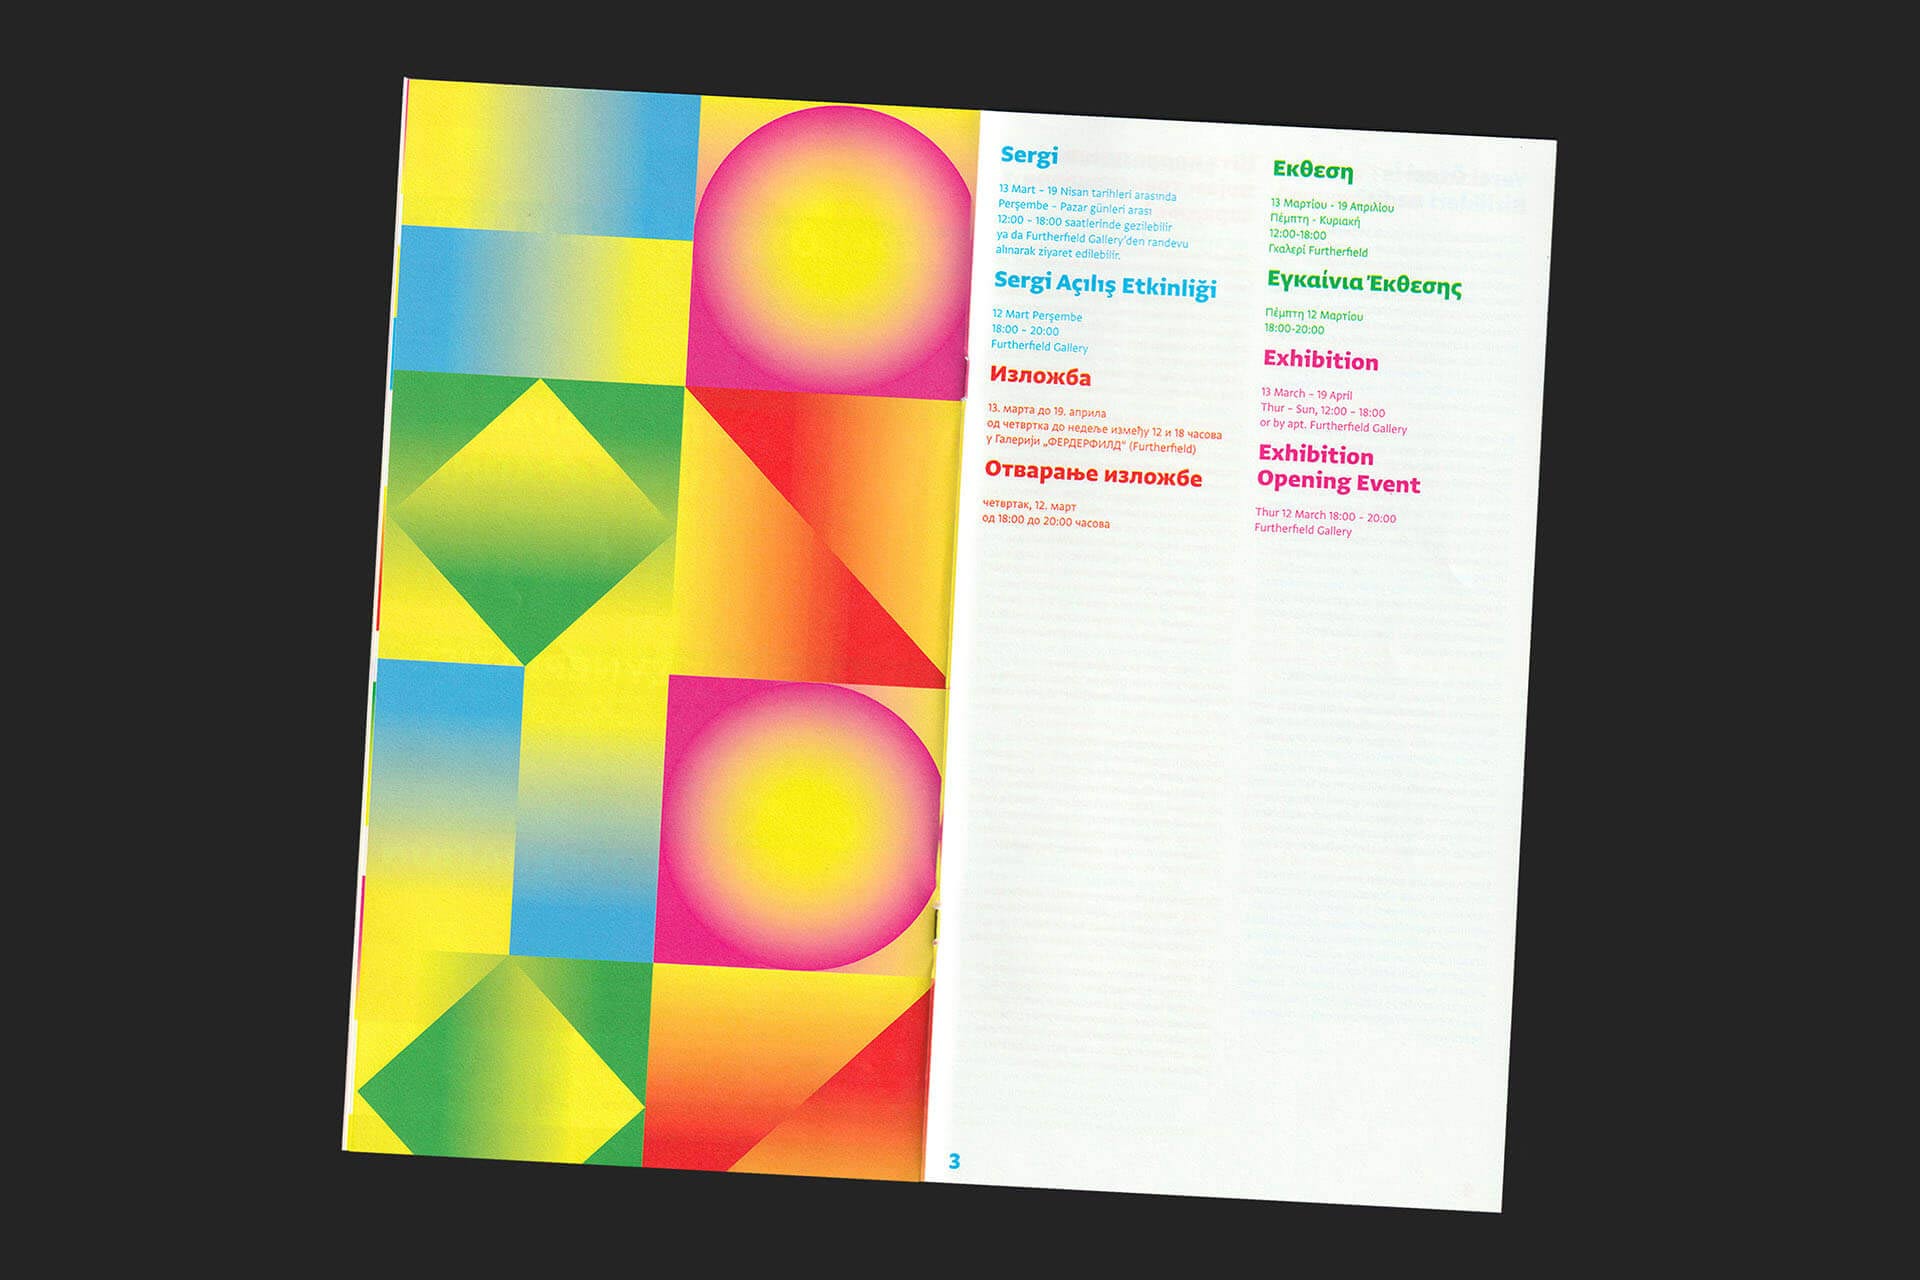 A scan showing the brightly covered visual identity, and the contents of the booklet